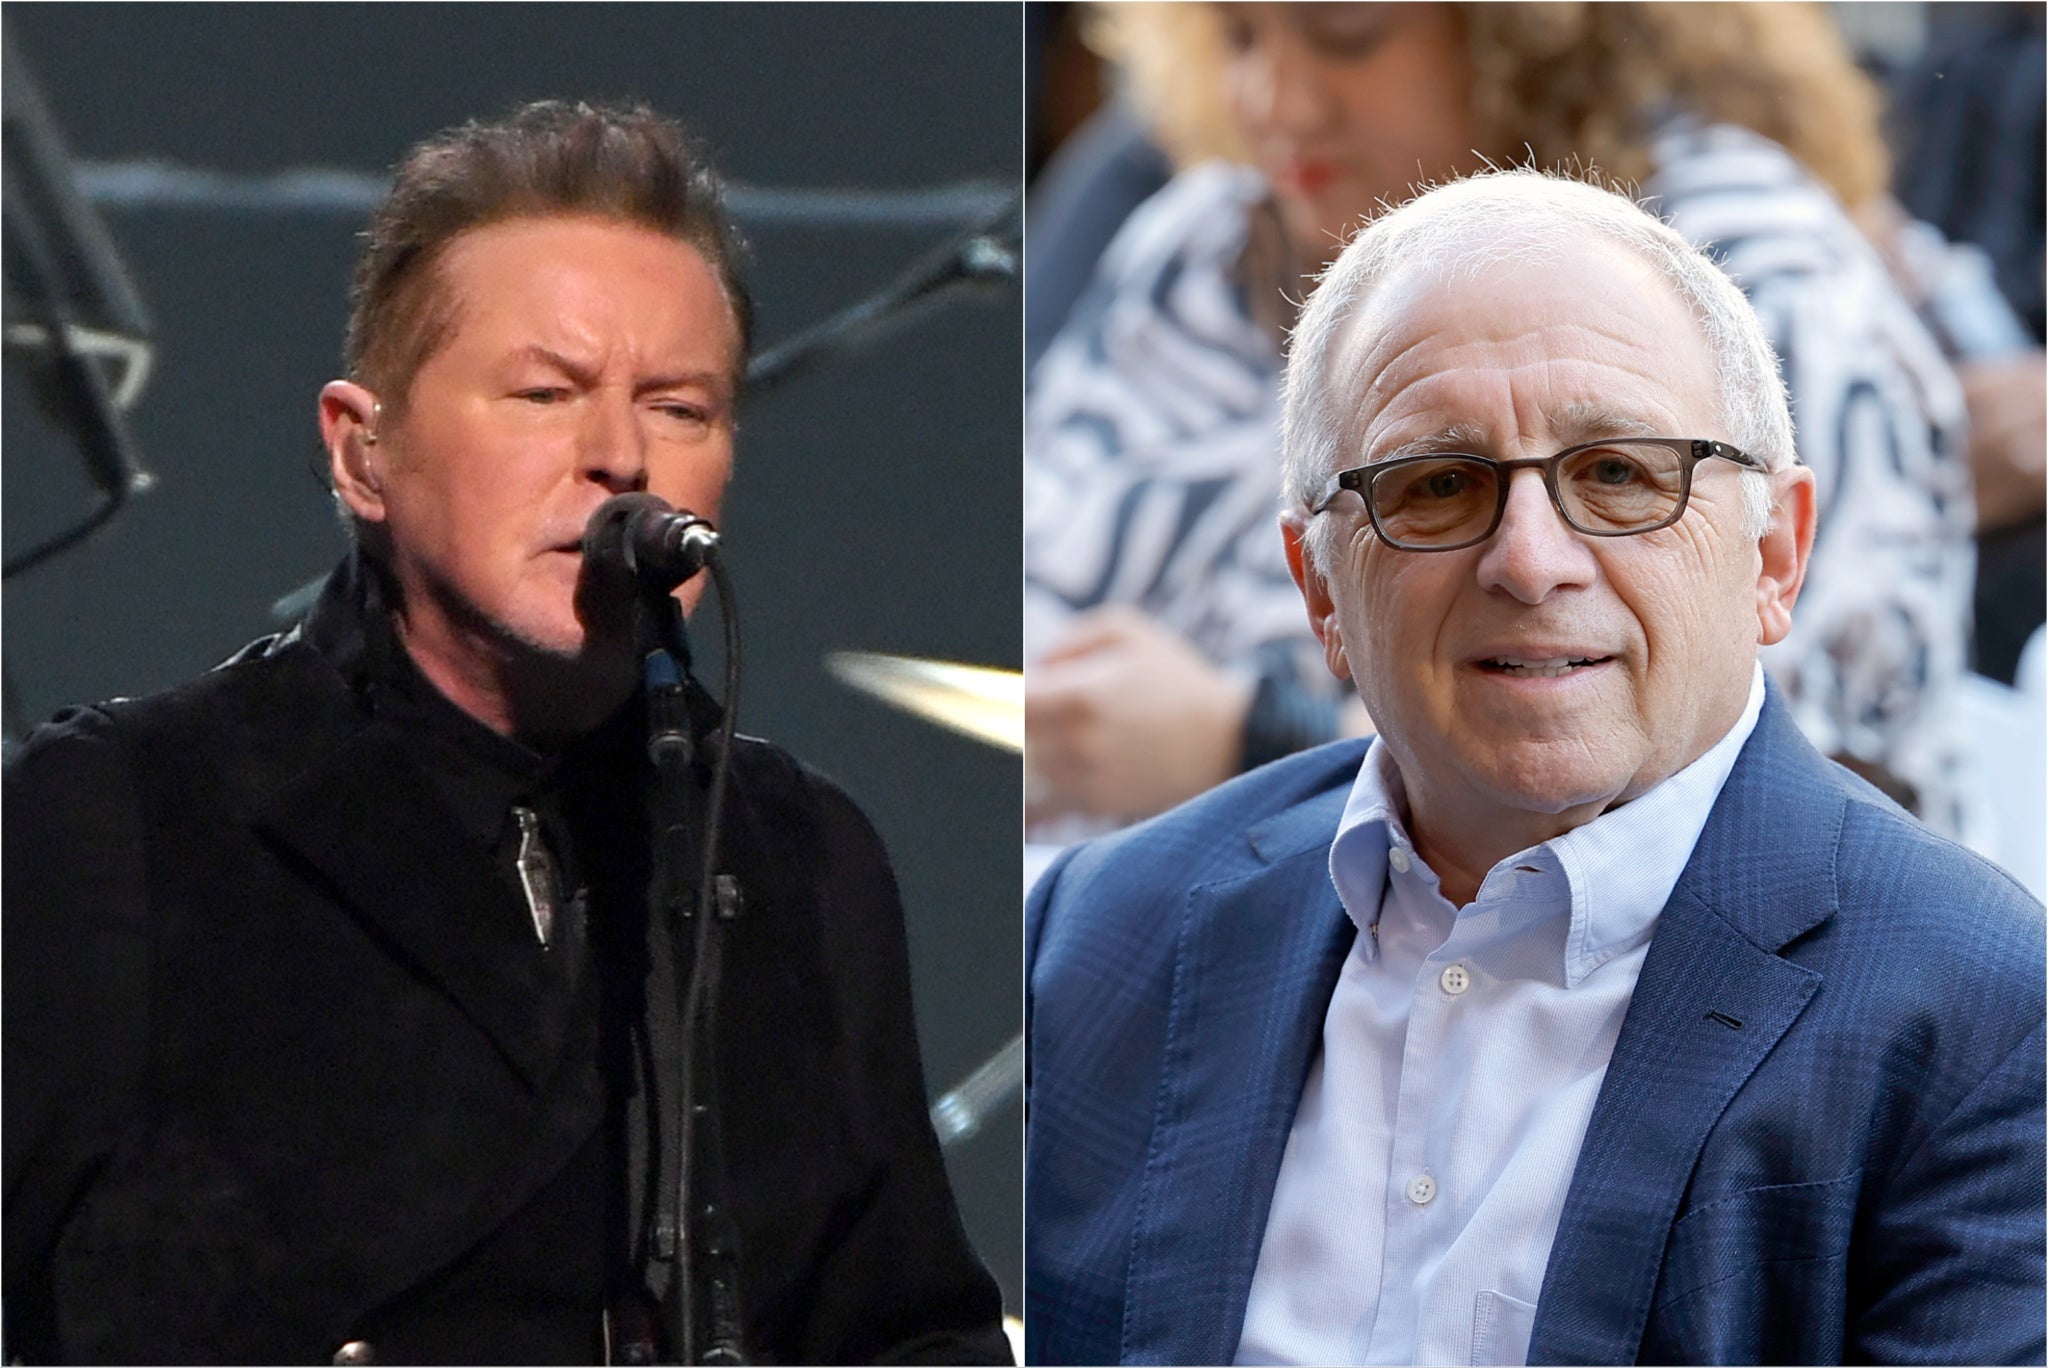 Don Henley (left) and Eagles manager Irving Azoff are key witnesses in the Hotel California case